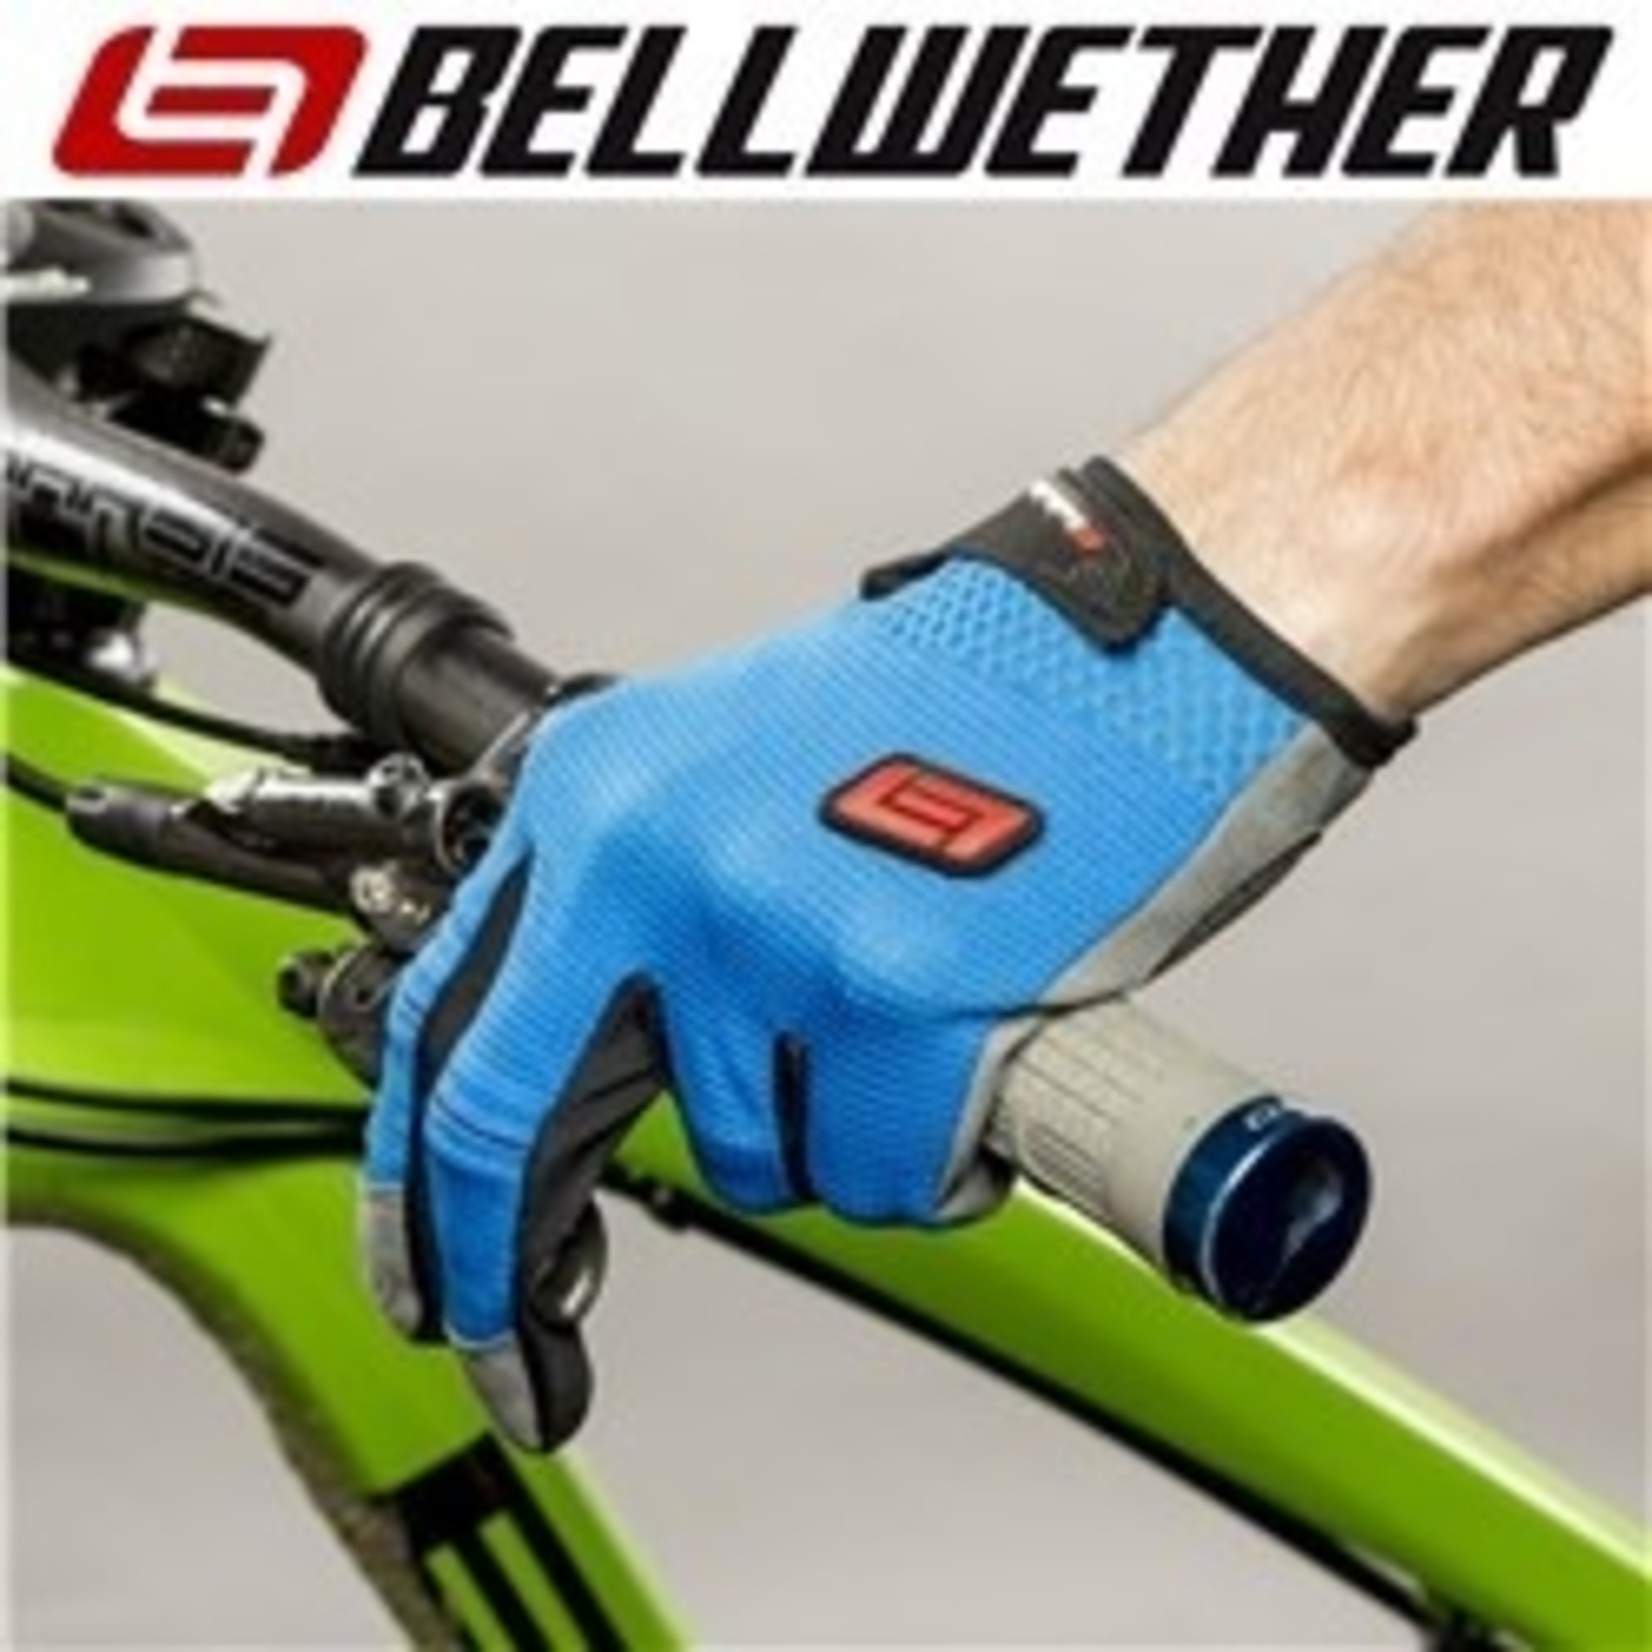 Bellwether Bellwether Cycling Gloves - Amara Palm - Men's Direct Dial - Ocean